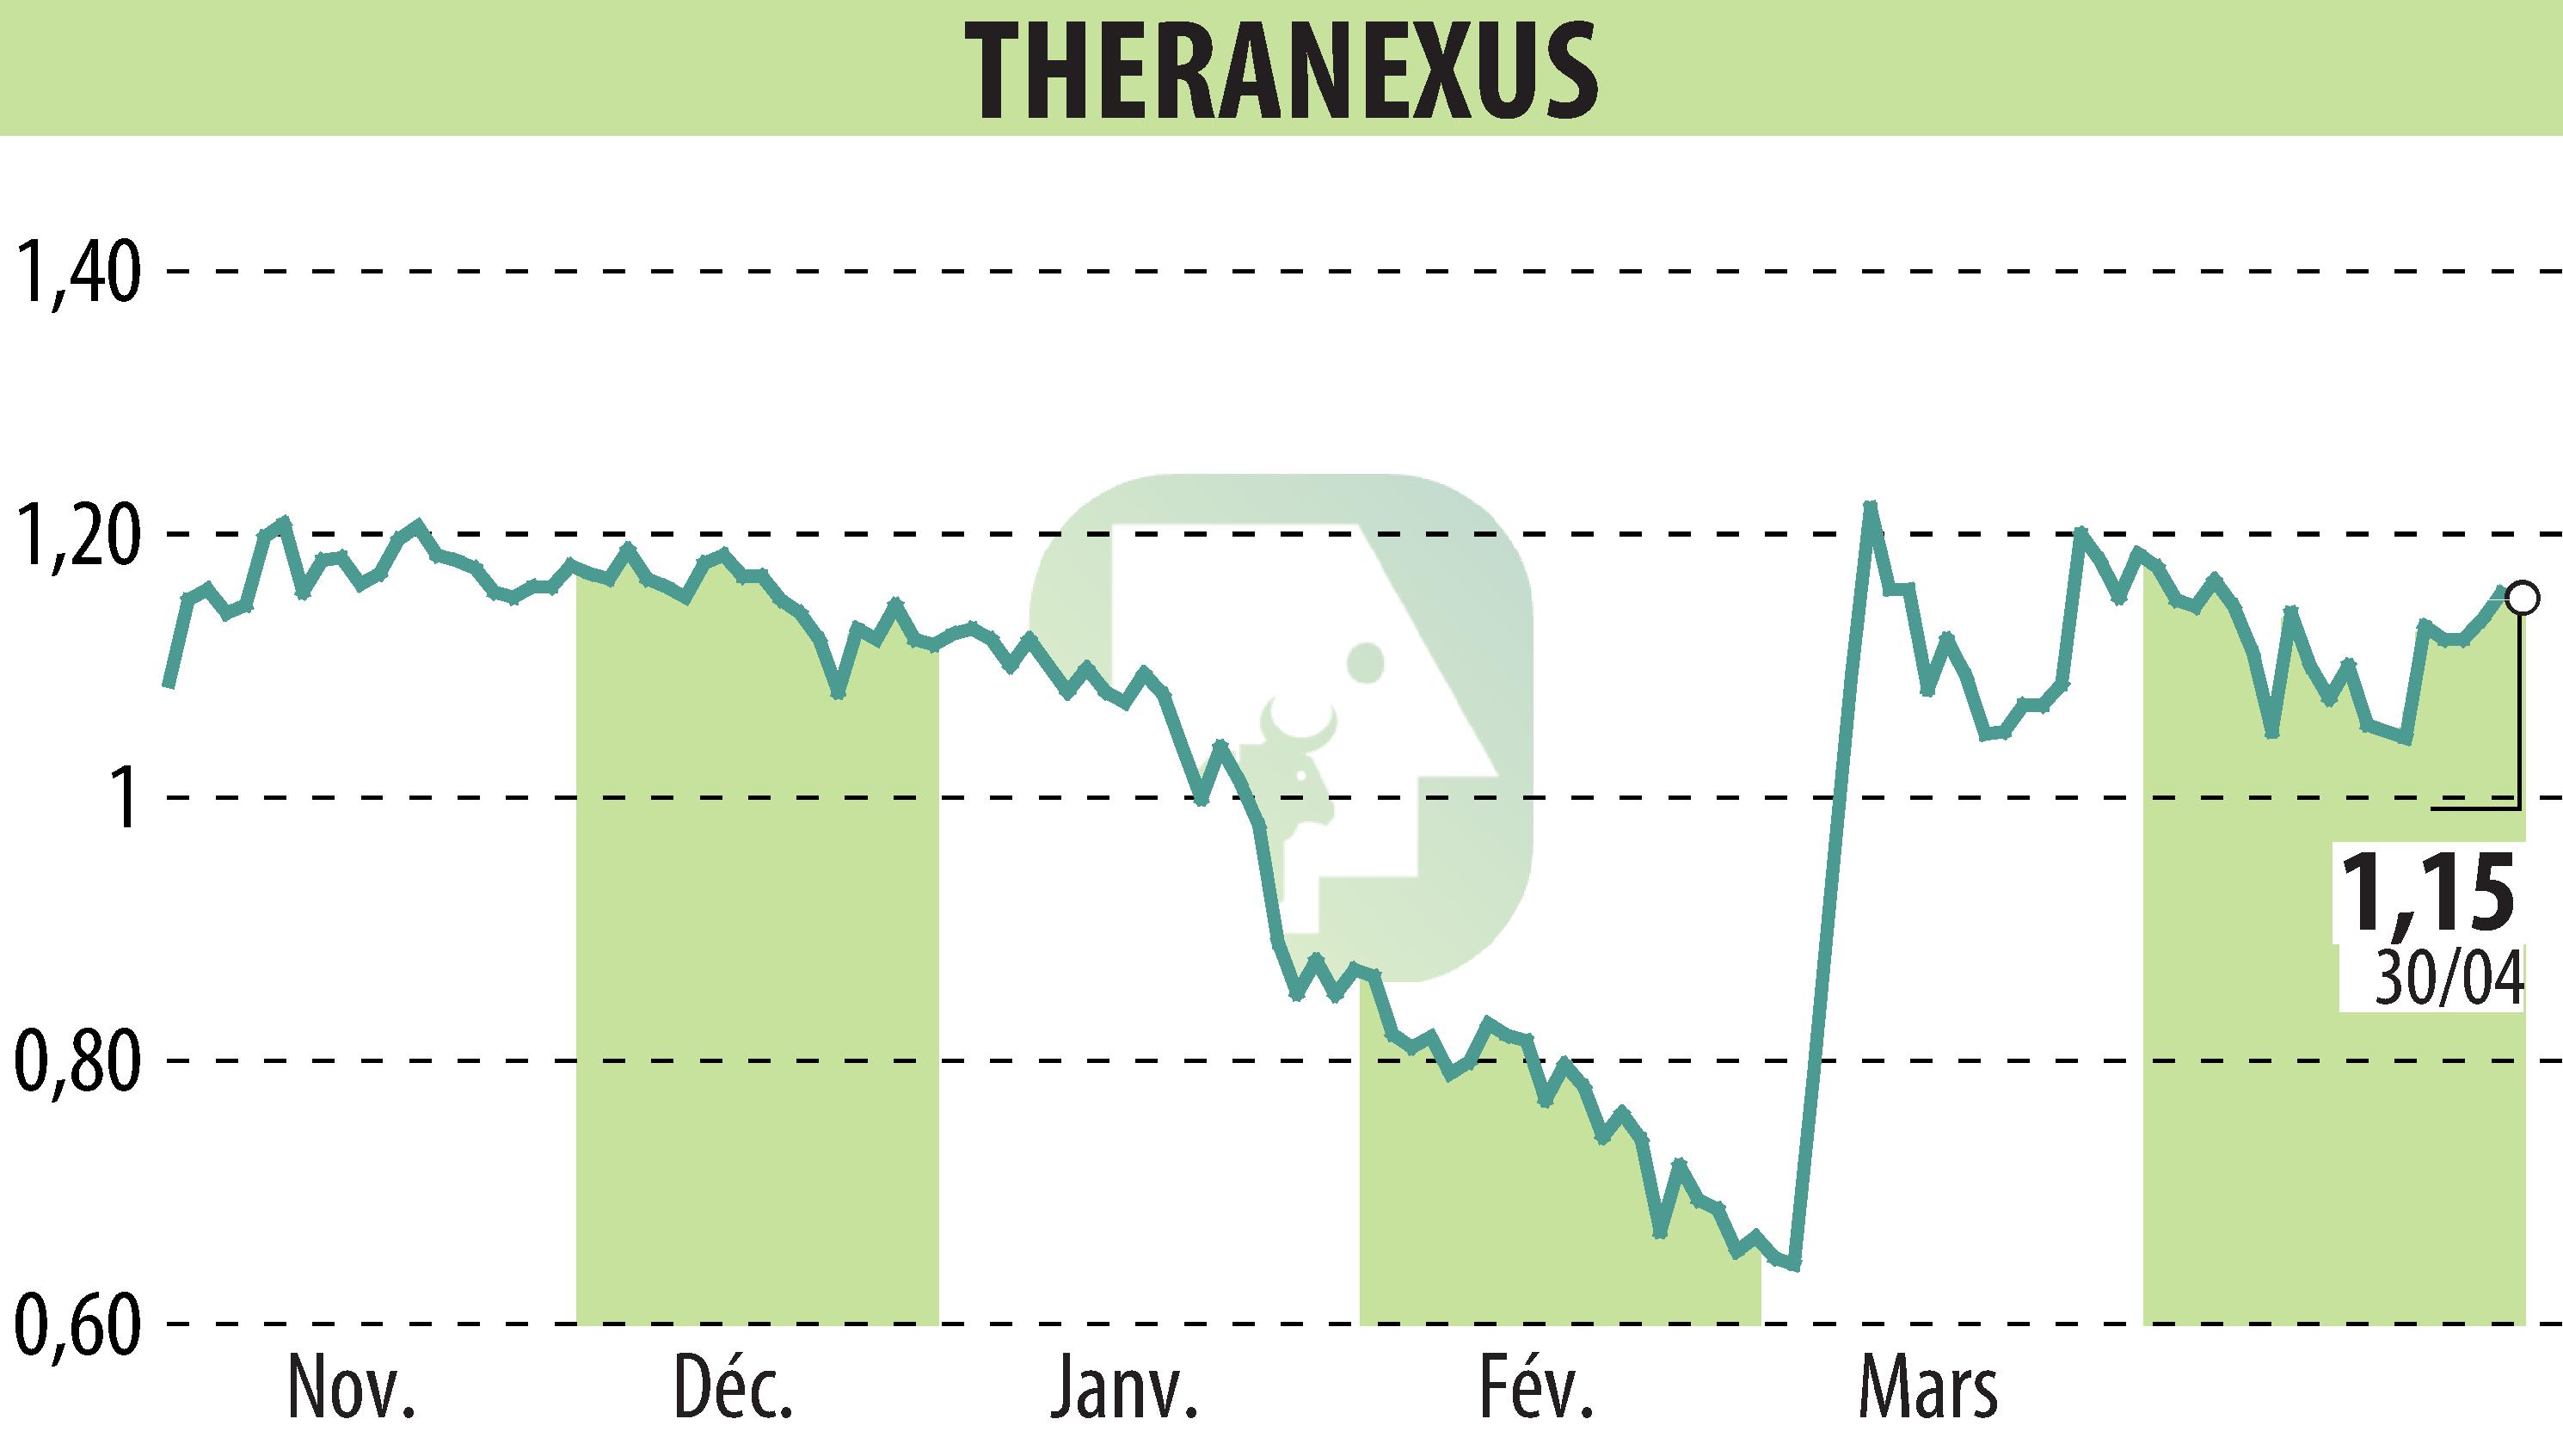 Stock price chart of Theranexus (EPA:ALTHX) showing fluctuations.